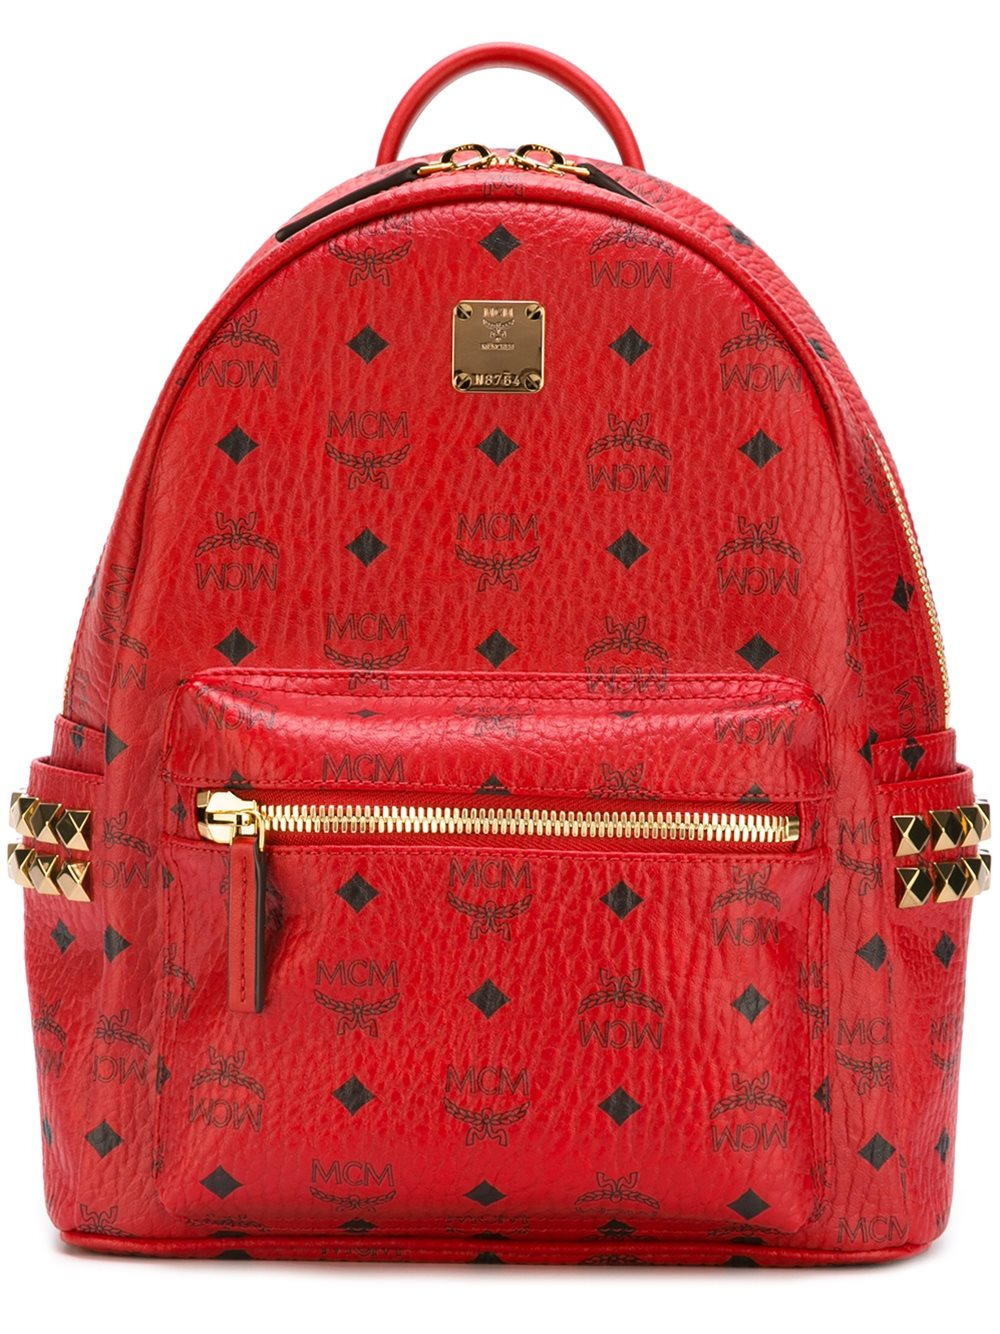 Lyst - Mcm Logo Print Backpack in Red